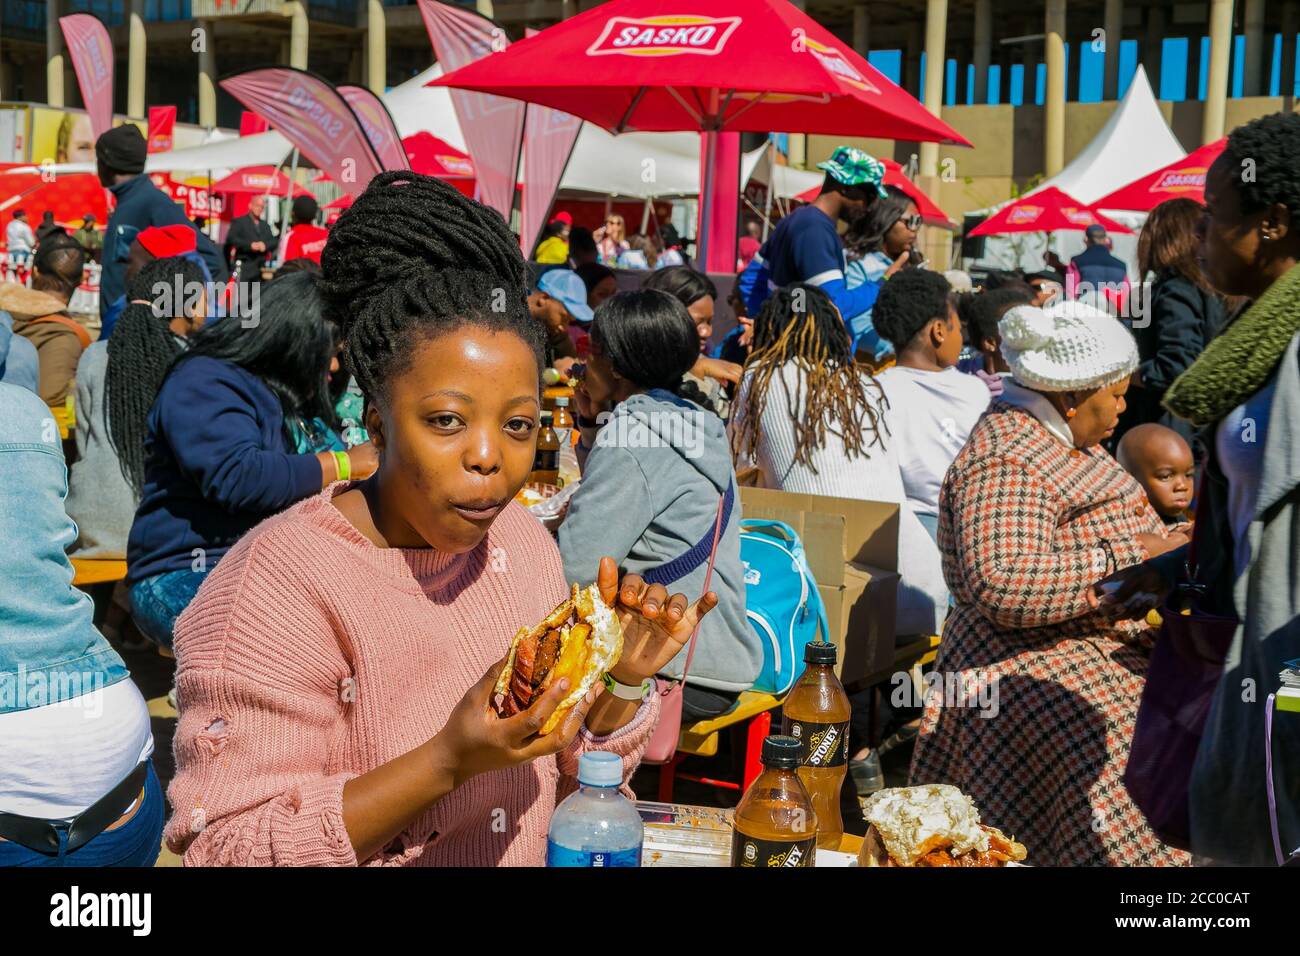 Soweto, South Africa - September 8, 2018: Diverse African people at a bread based street food outdoor festival Stock Photo